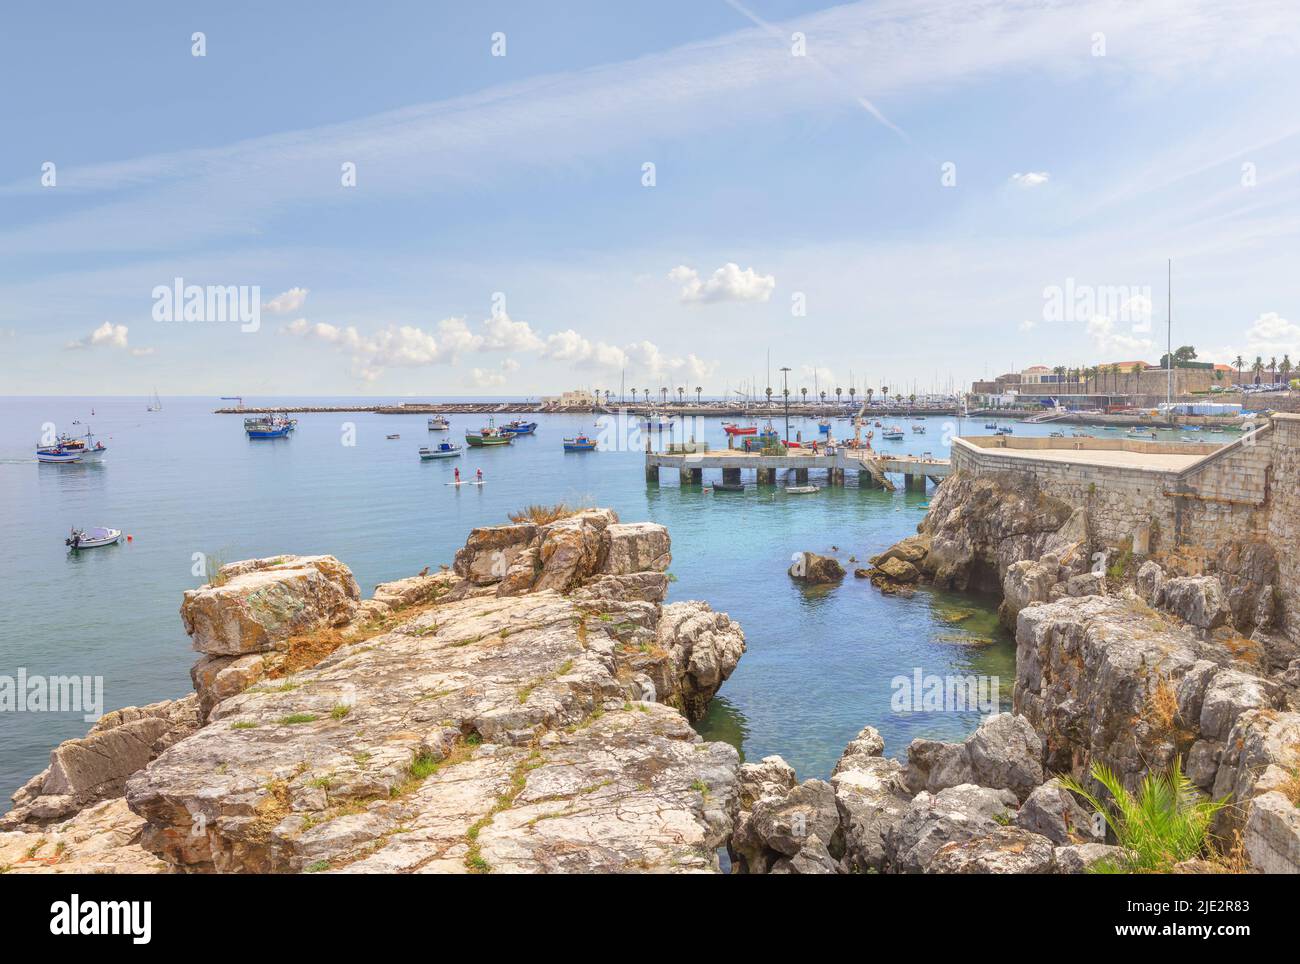 Cascais near Lisbon, seaside town. Picturesque landscape with view of the ocean, beautiful cliffs and port. Portugal Stock Photo